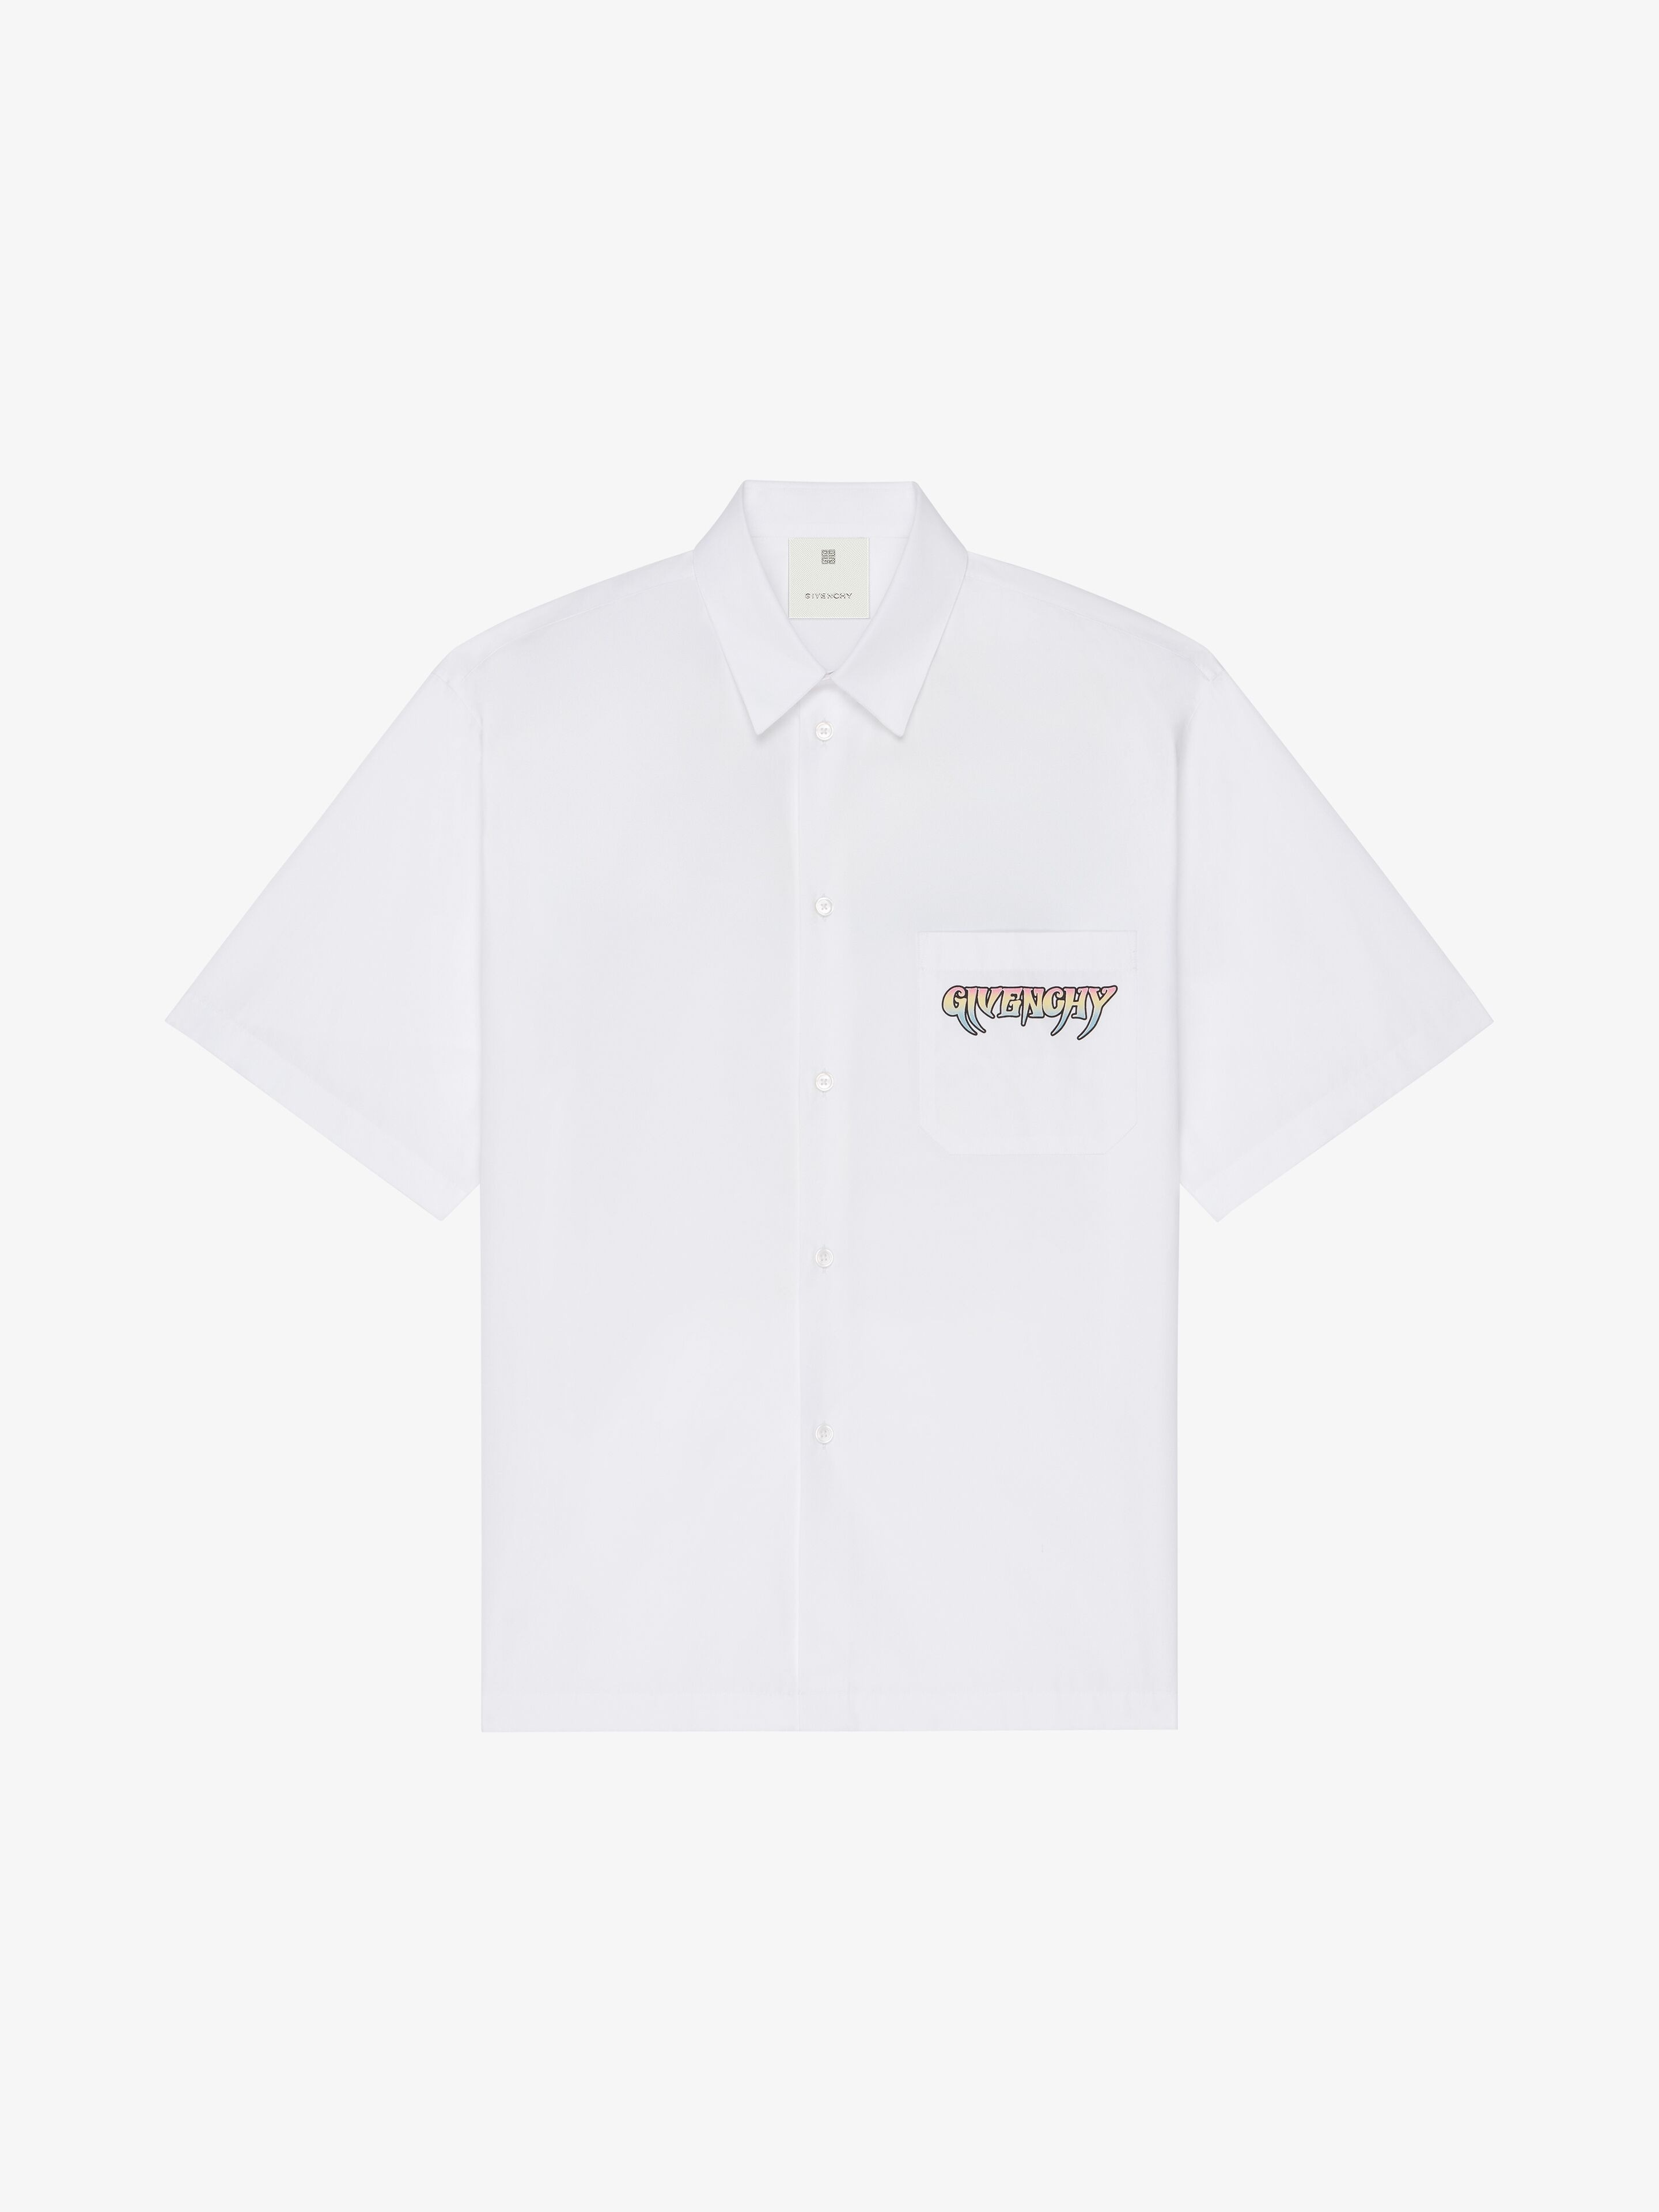 SHIRT IN POPLIN WITH GIVENCHY WORLD TOUR PRINT - 1